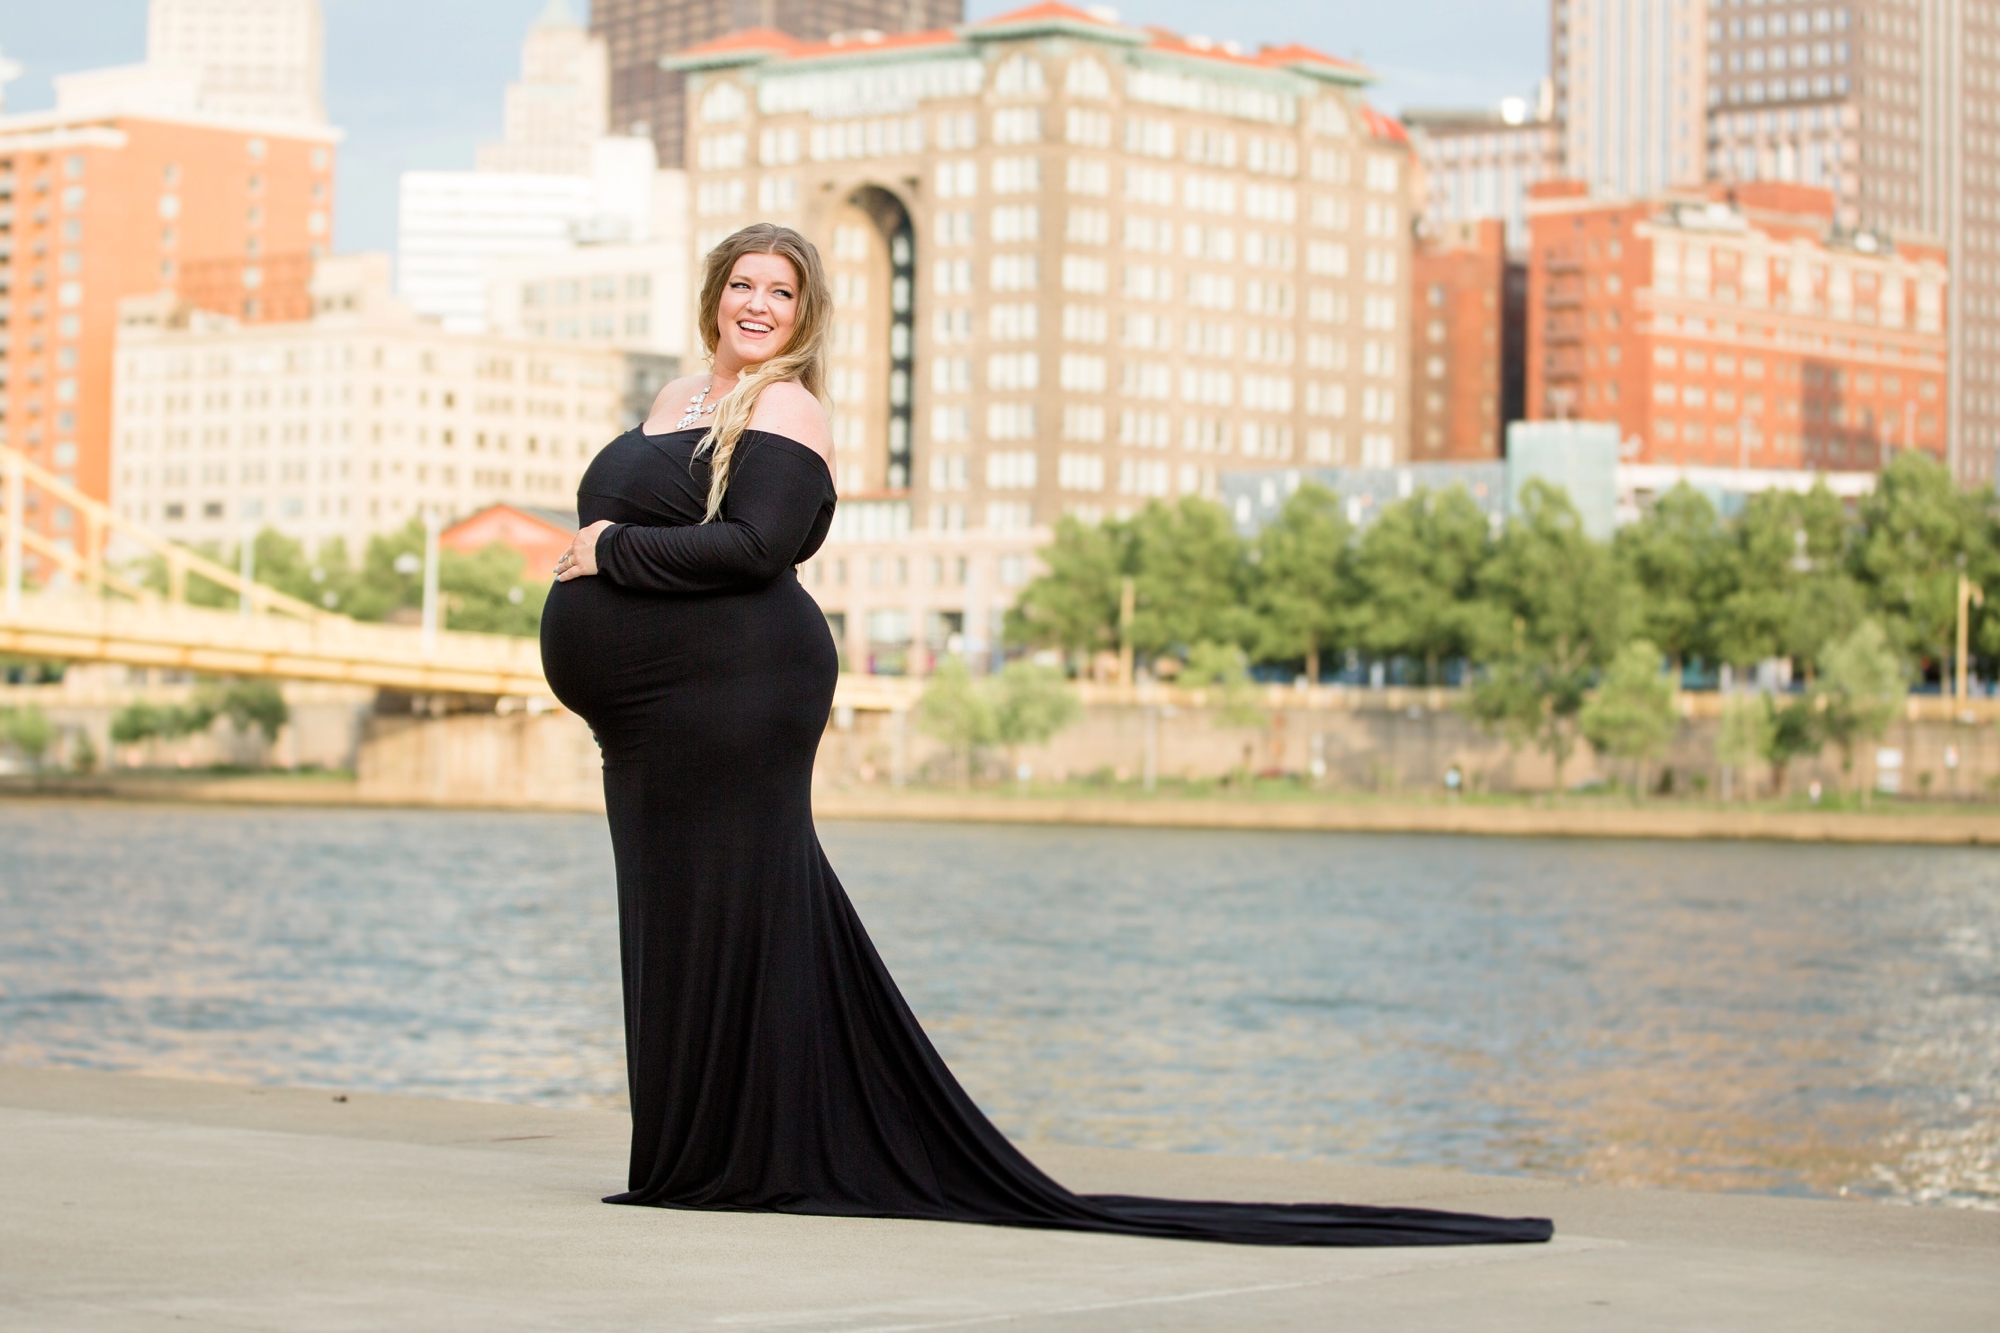 pittsburgh maternity photographer, pittsburgh family photographer, allegheny commons park, north side, north shore, cranberry township family photographer